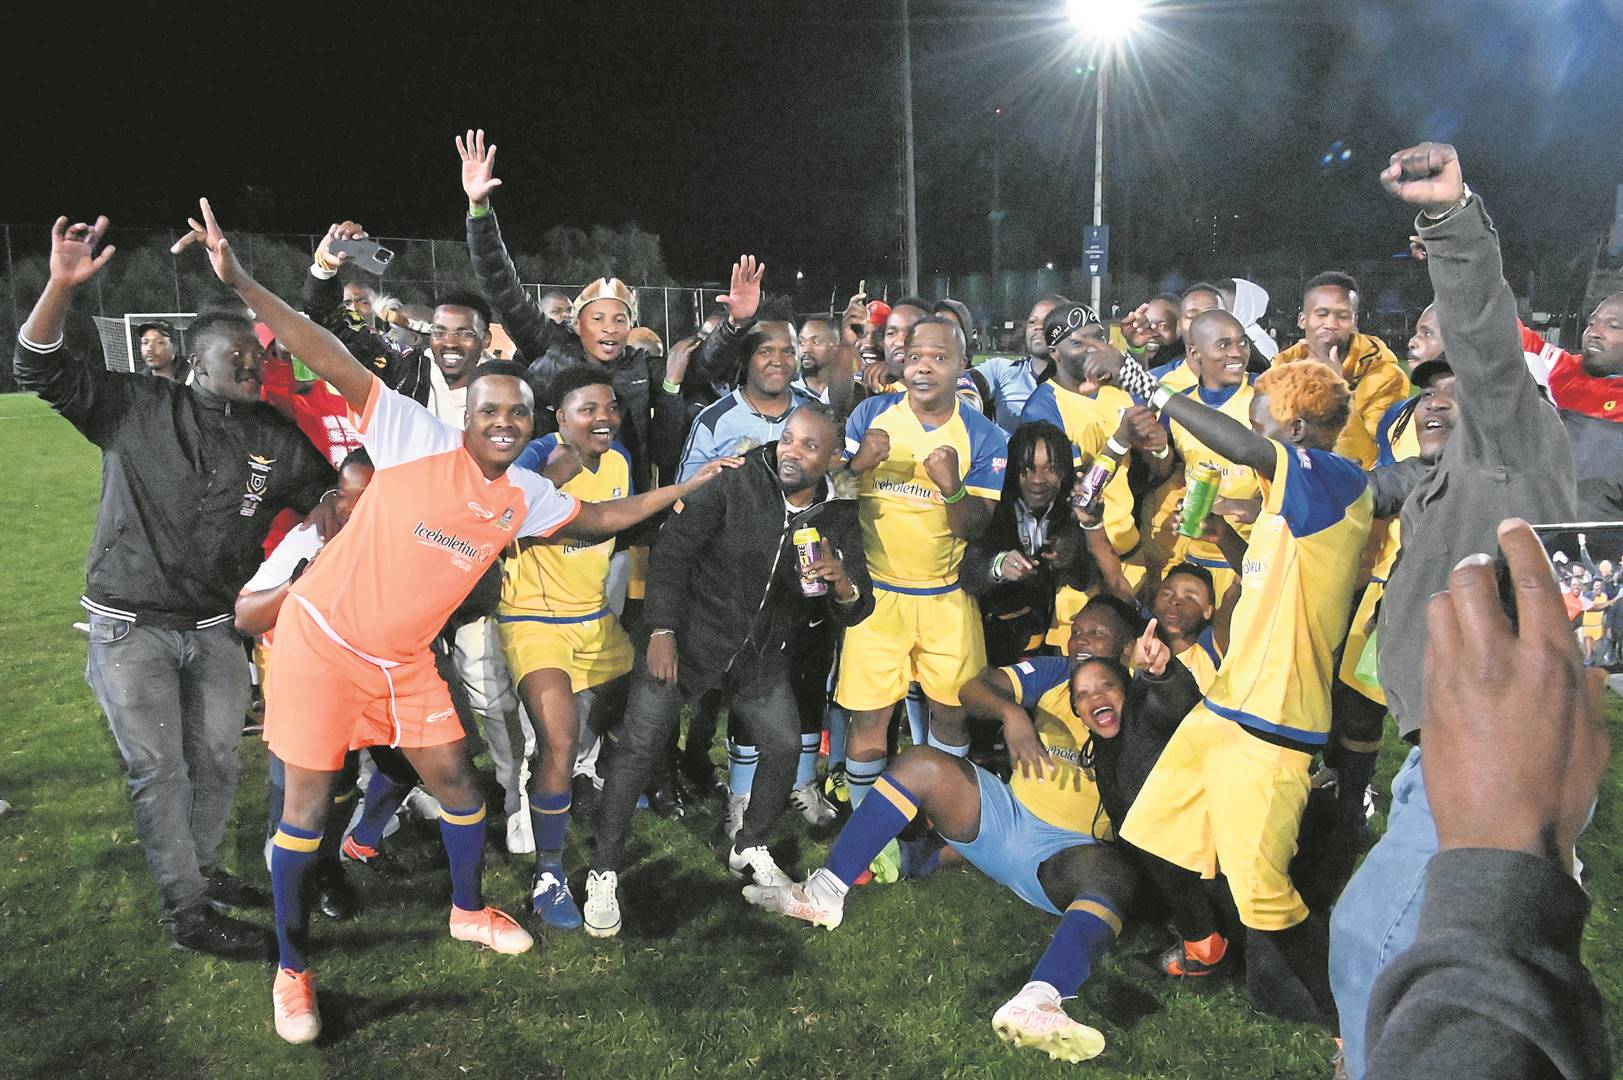 The maskandi team celebrate after winning the Celebrity soccer tournament at Wits Football Stadium at the weekend. Inset: Cassper Nyovest, DJ Tira and Big Zulu sharing a light moment before the matches kicked off.         Photos by Gallo Images/Oupa Bopape